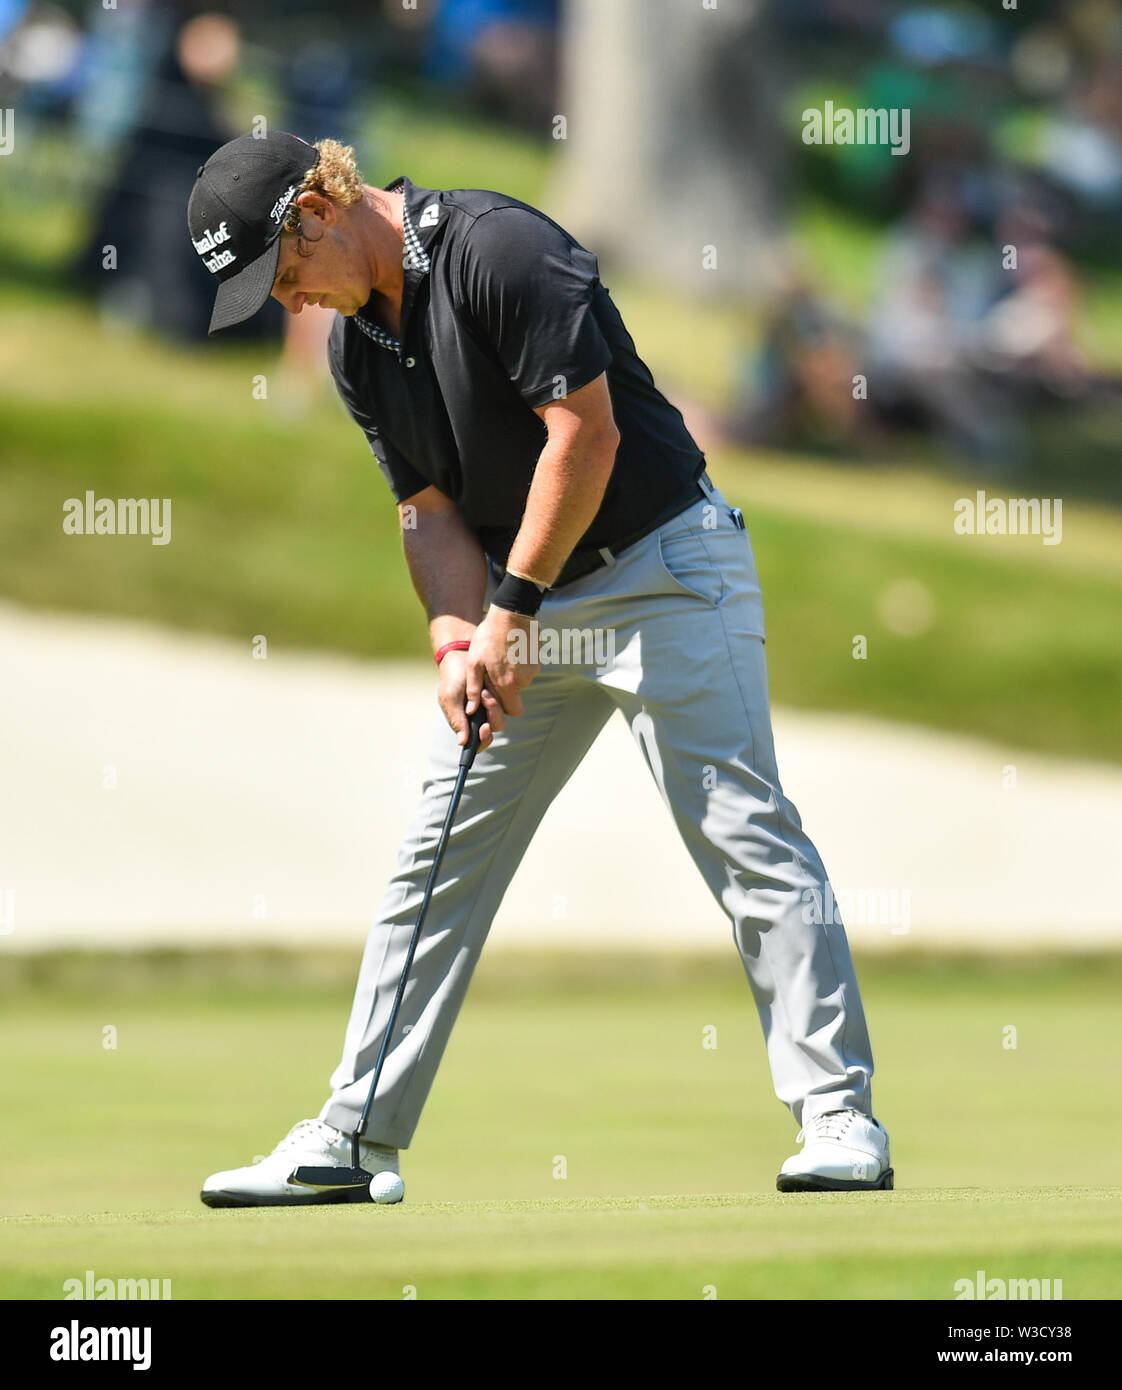 Silvis, Iowa, USA. 14th July, 2019. PGA golfer Bud Cauley lines up a putt on the green of the 18th hole during the final round of the John Deere Classic Sunday, July 14, 2019, at TPC Deere Run in Silvis. Credit: Meg Mclaughlin/Mmclaughlin@Qconl/Quad-City Times/ZUMA Wire/Alamy Live News Stock Photo